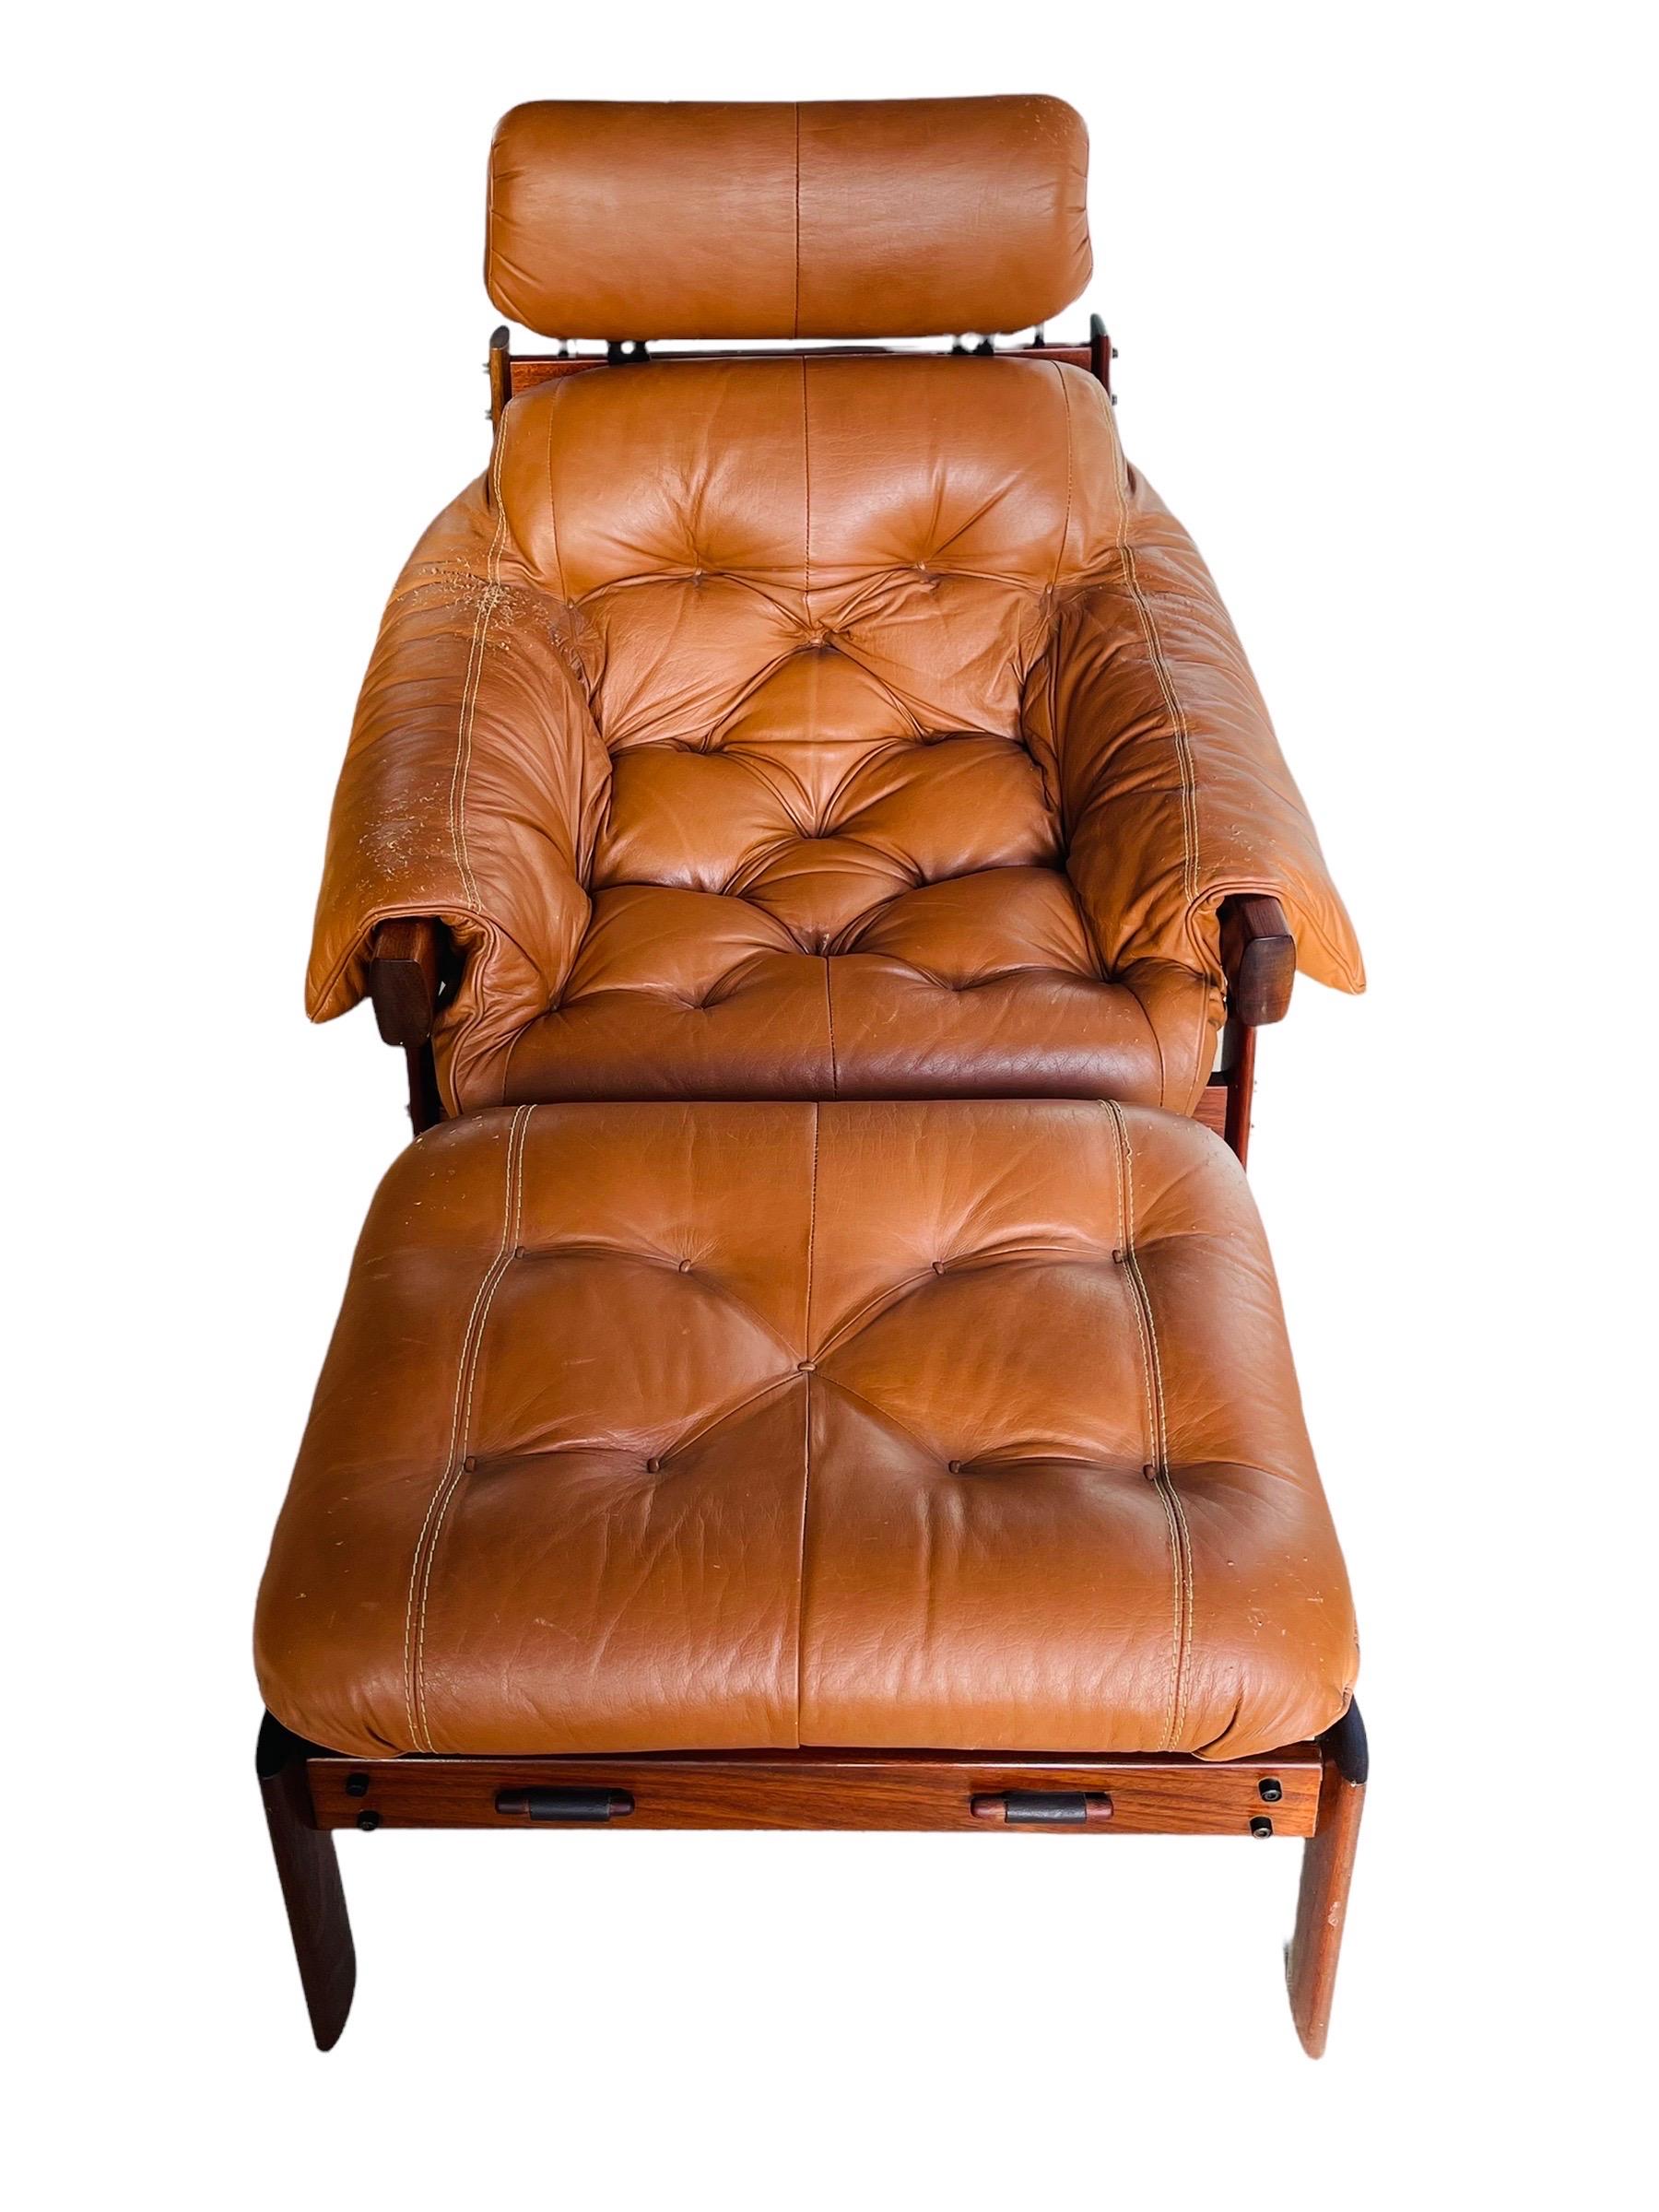 This stunning Brazilian Rosewood armchair and ottoman was designed by Percival Lafer in the 1960s. The solid Rosewood frame carrie’s the smooth leather tufted upholstery with leather straps on the back. Both the frame and cognac leather are in good